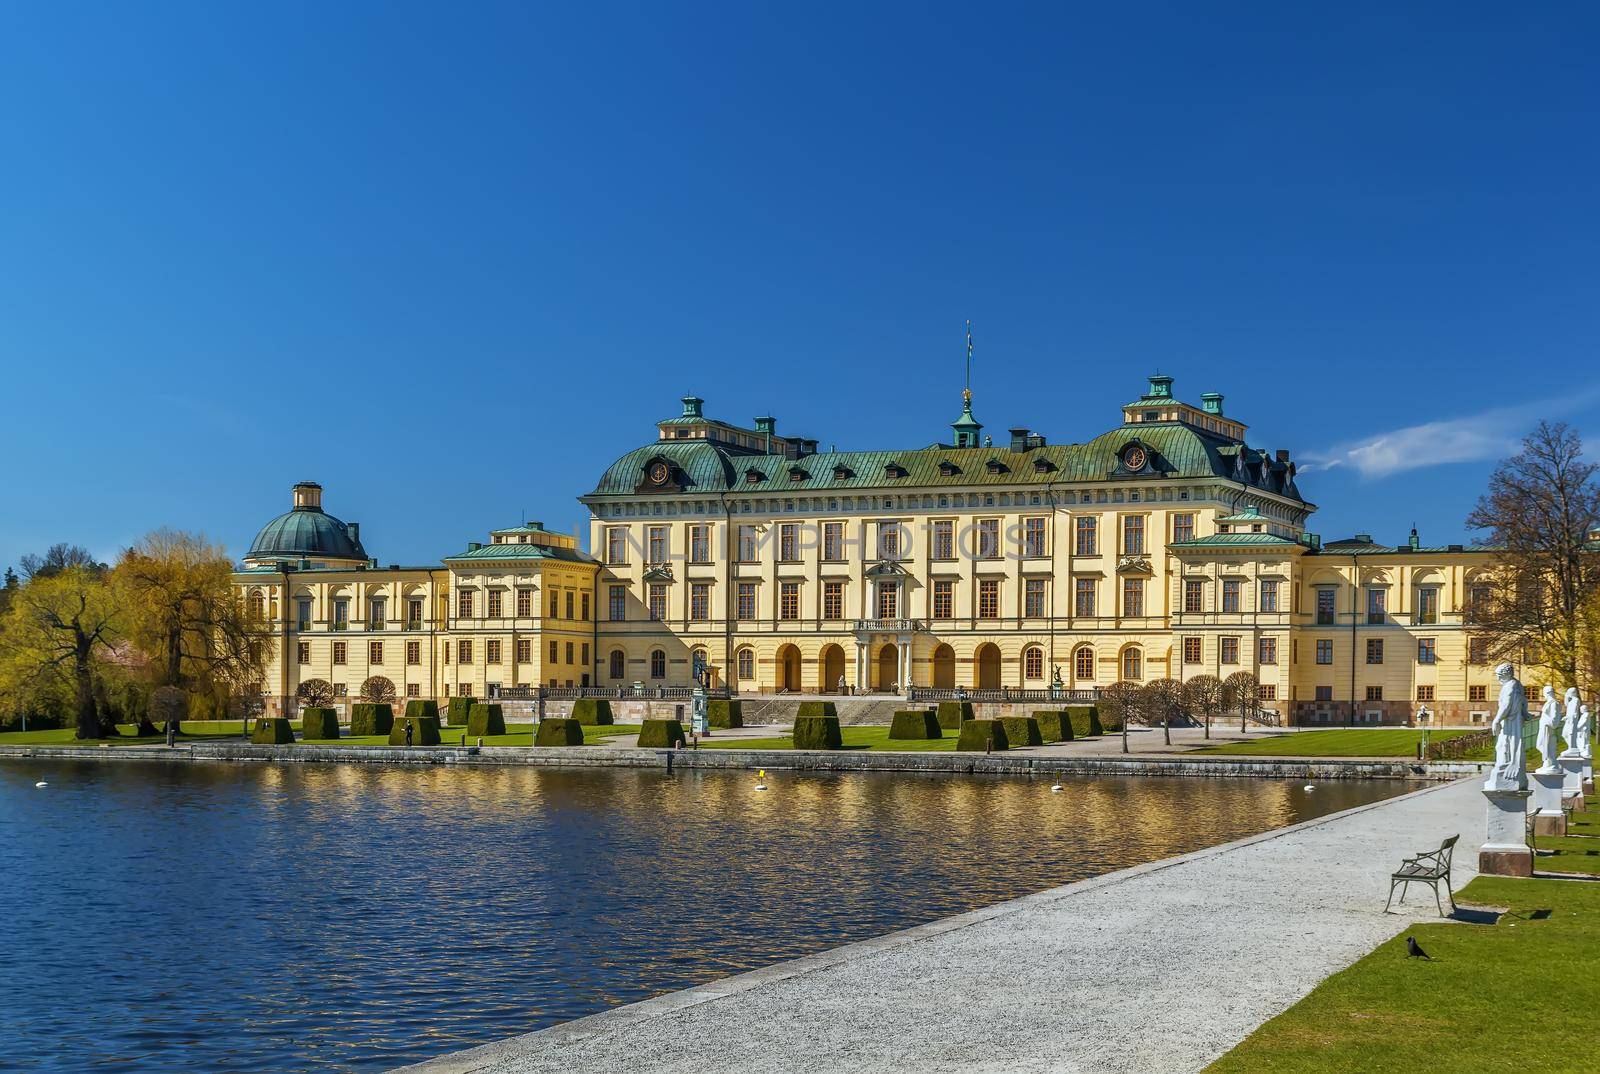 The Drottningholm Palace is the private residence of the Swedish royal family in Stockholm, Sweden